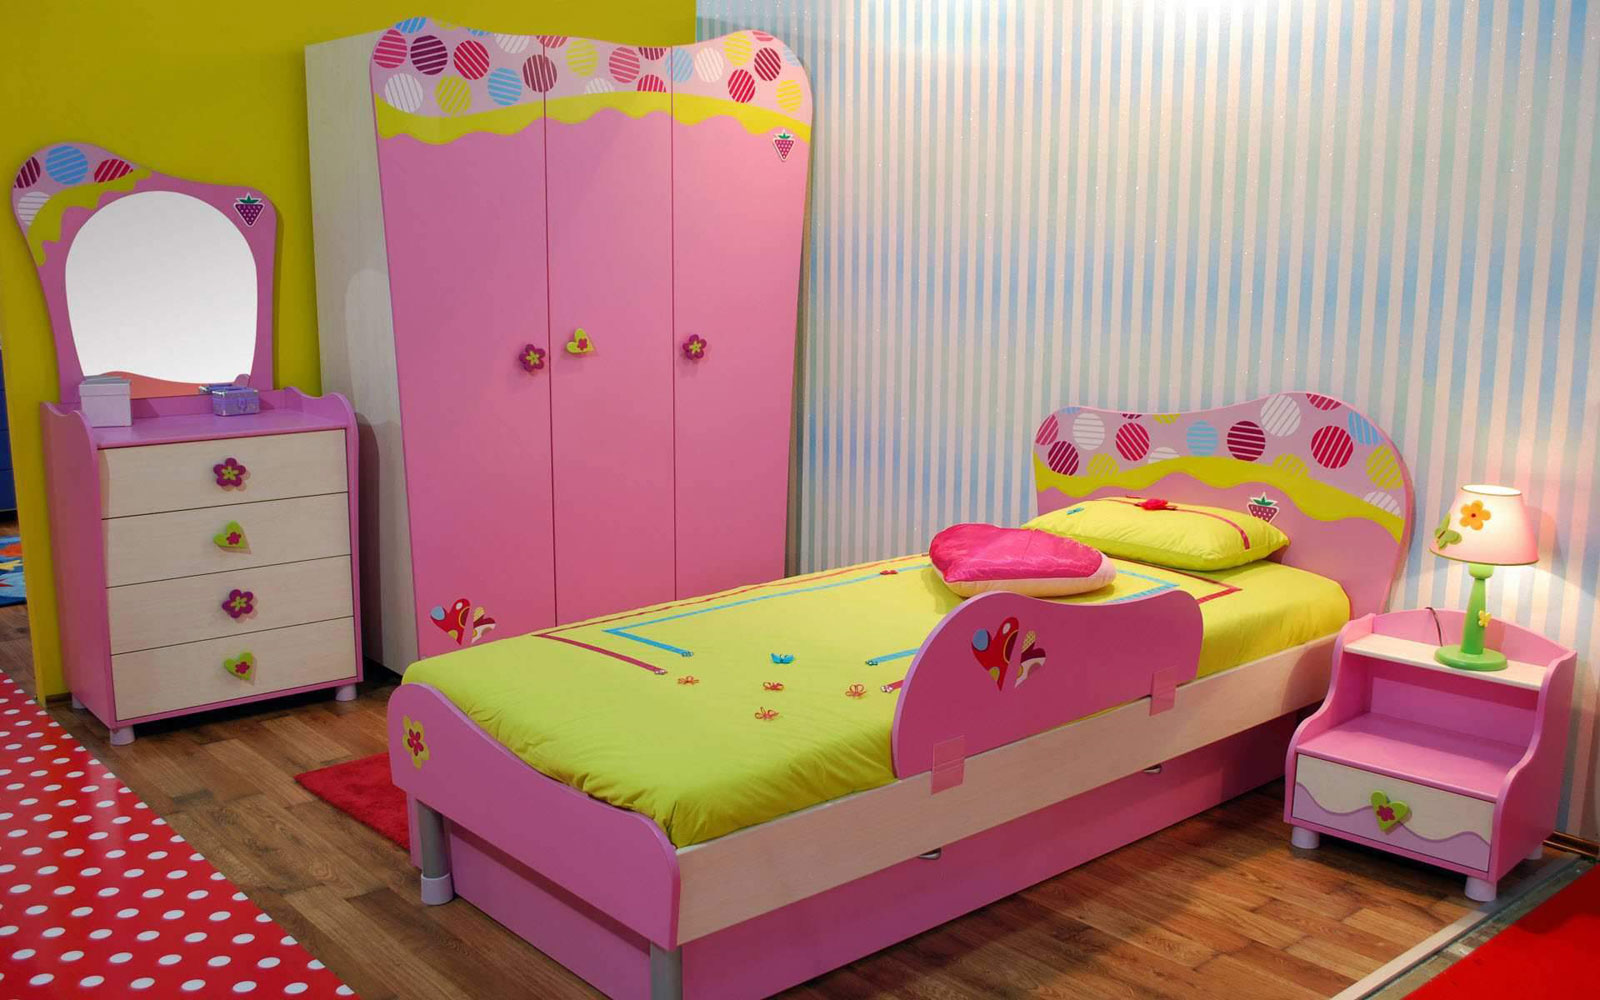 Girls Bedroom Pink Amusing Girls Bedroom Furniture Applying Pink And Green Color Of Single Bed And Nightstand Also Furnished With Drawers And Completed With Closet Bedroom Girls Bedroom Furniture: The Beach Condo Ideas